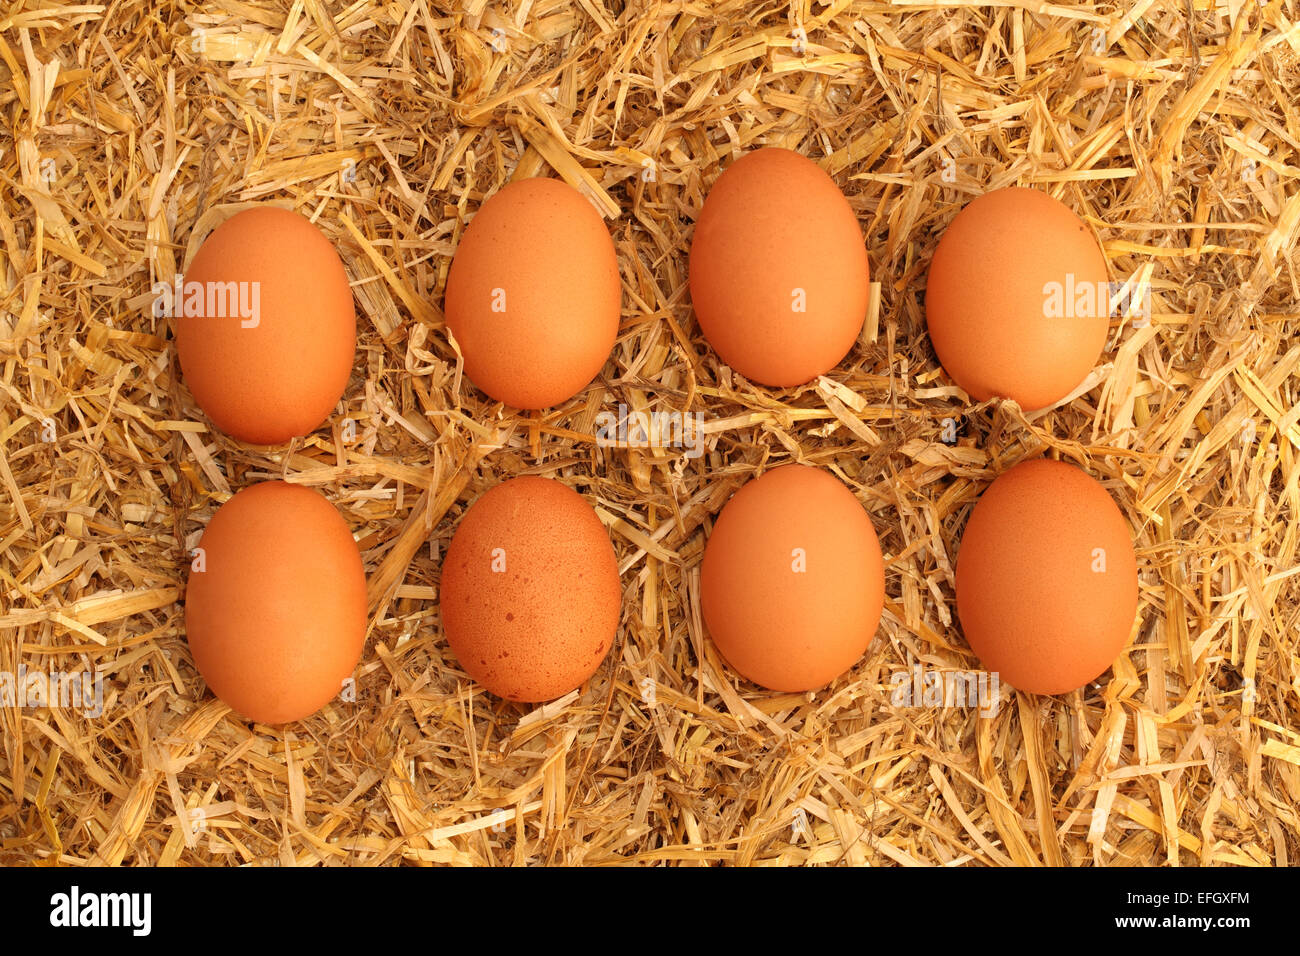 Eight brown chickens eggs on a bed of straw Stock Photo